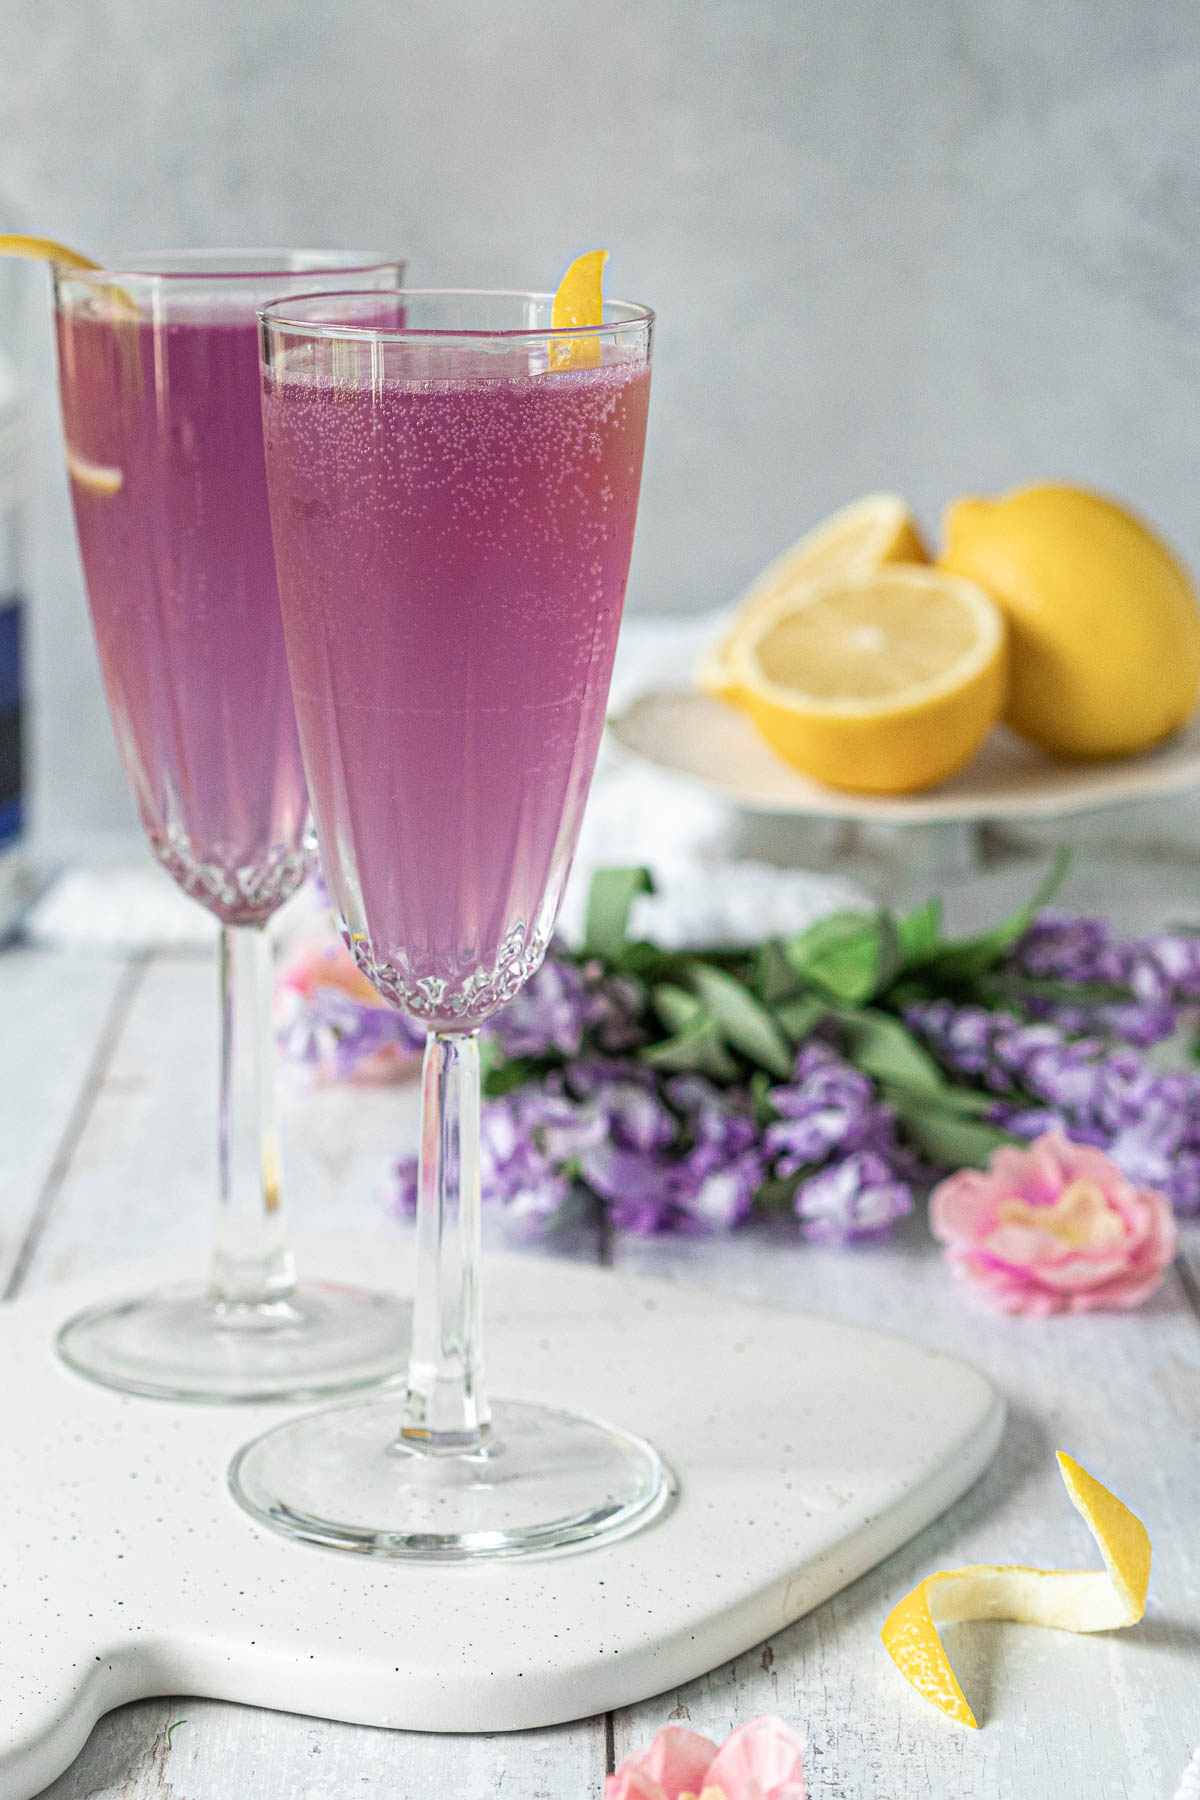 two champagne flutes filled with a pale purple bubbly drink and garnished with lemon twists 